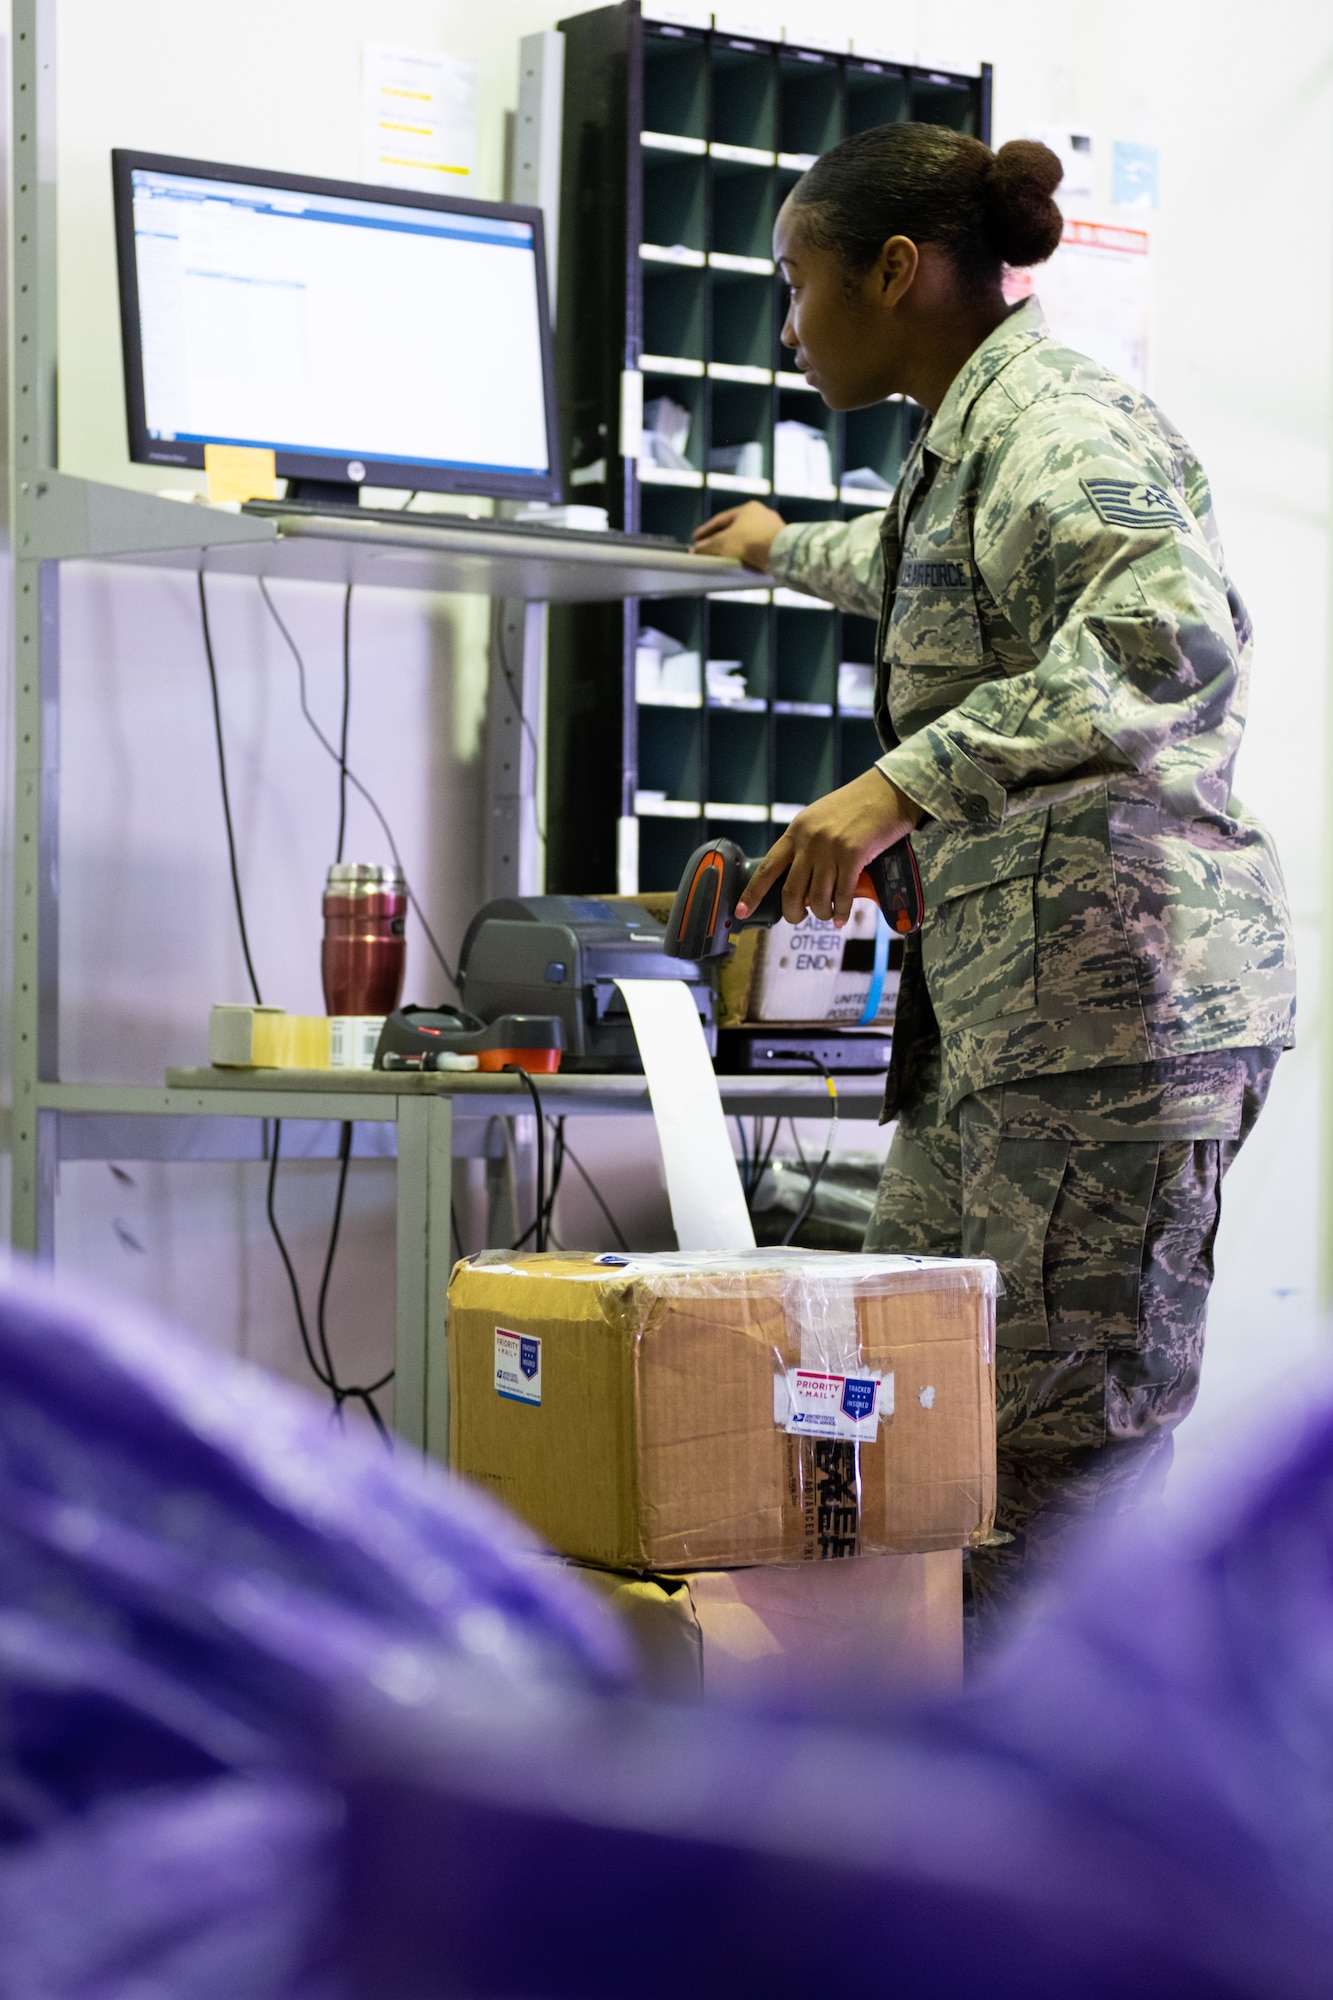 Tech. Sgt. Faneshia Walton, Pacific Air Forces Air Postal Squadron Det 4 aerial mail terminal chief, processes outgoing mail at the mail warehouse in Sydney, August 24, 2019. The detachment supports all military personnel, DoD employees and their families assigned to Australia. (U.S. Air Force photo by Master Sgt. Benjamin Wilson)